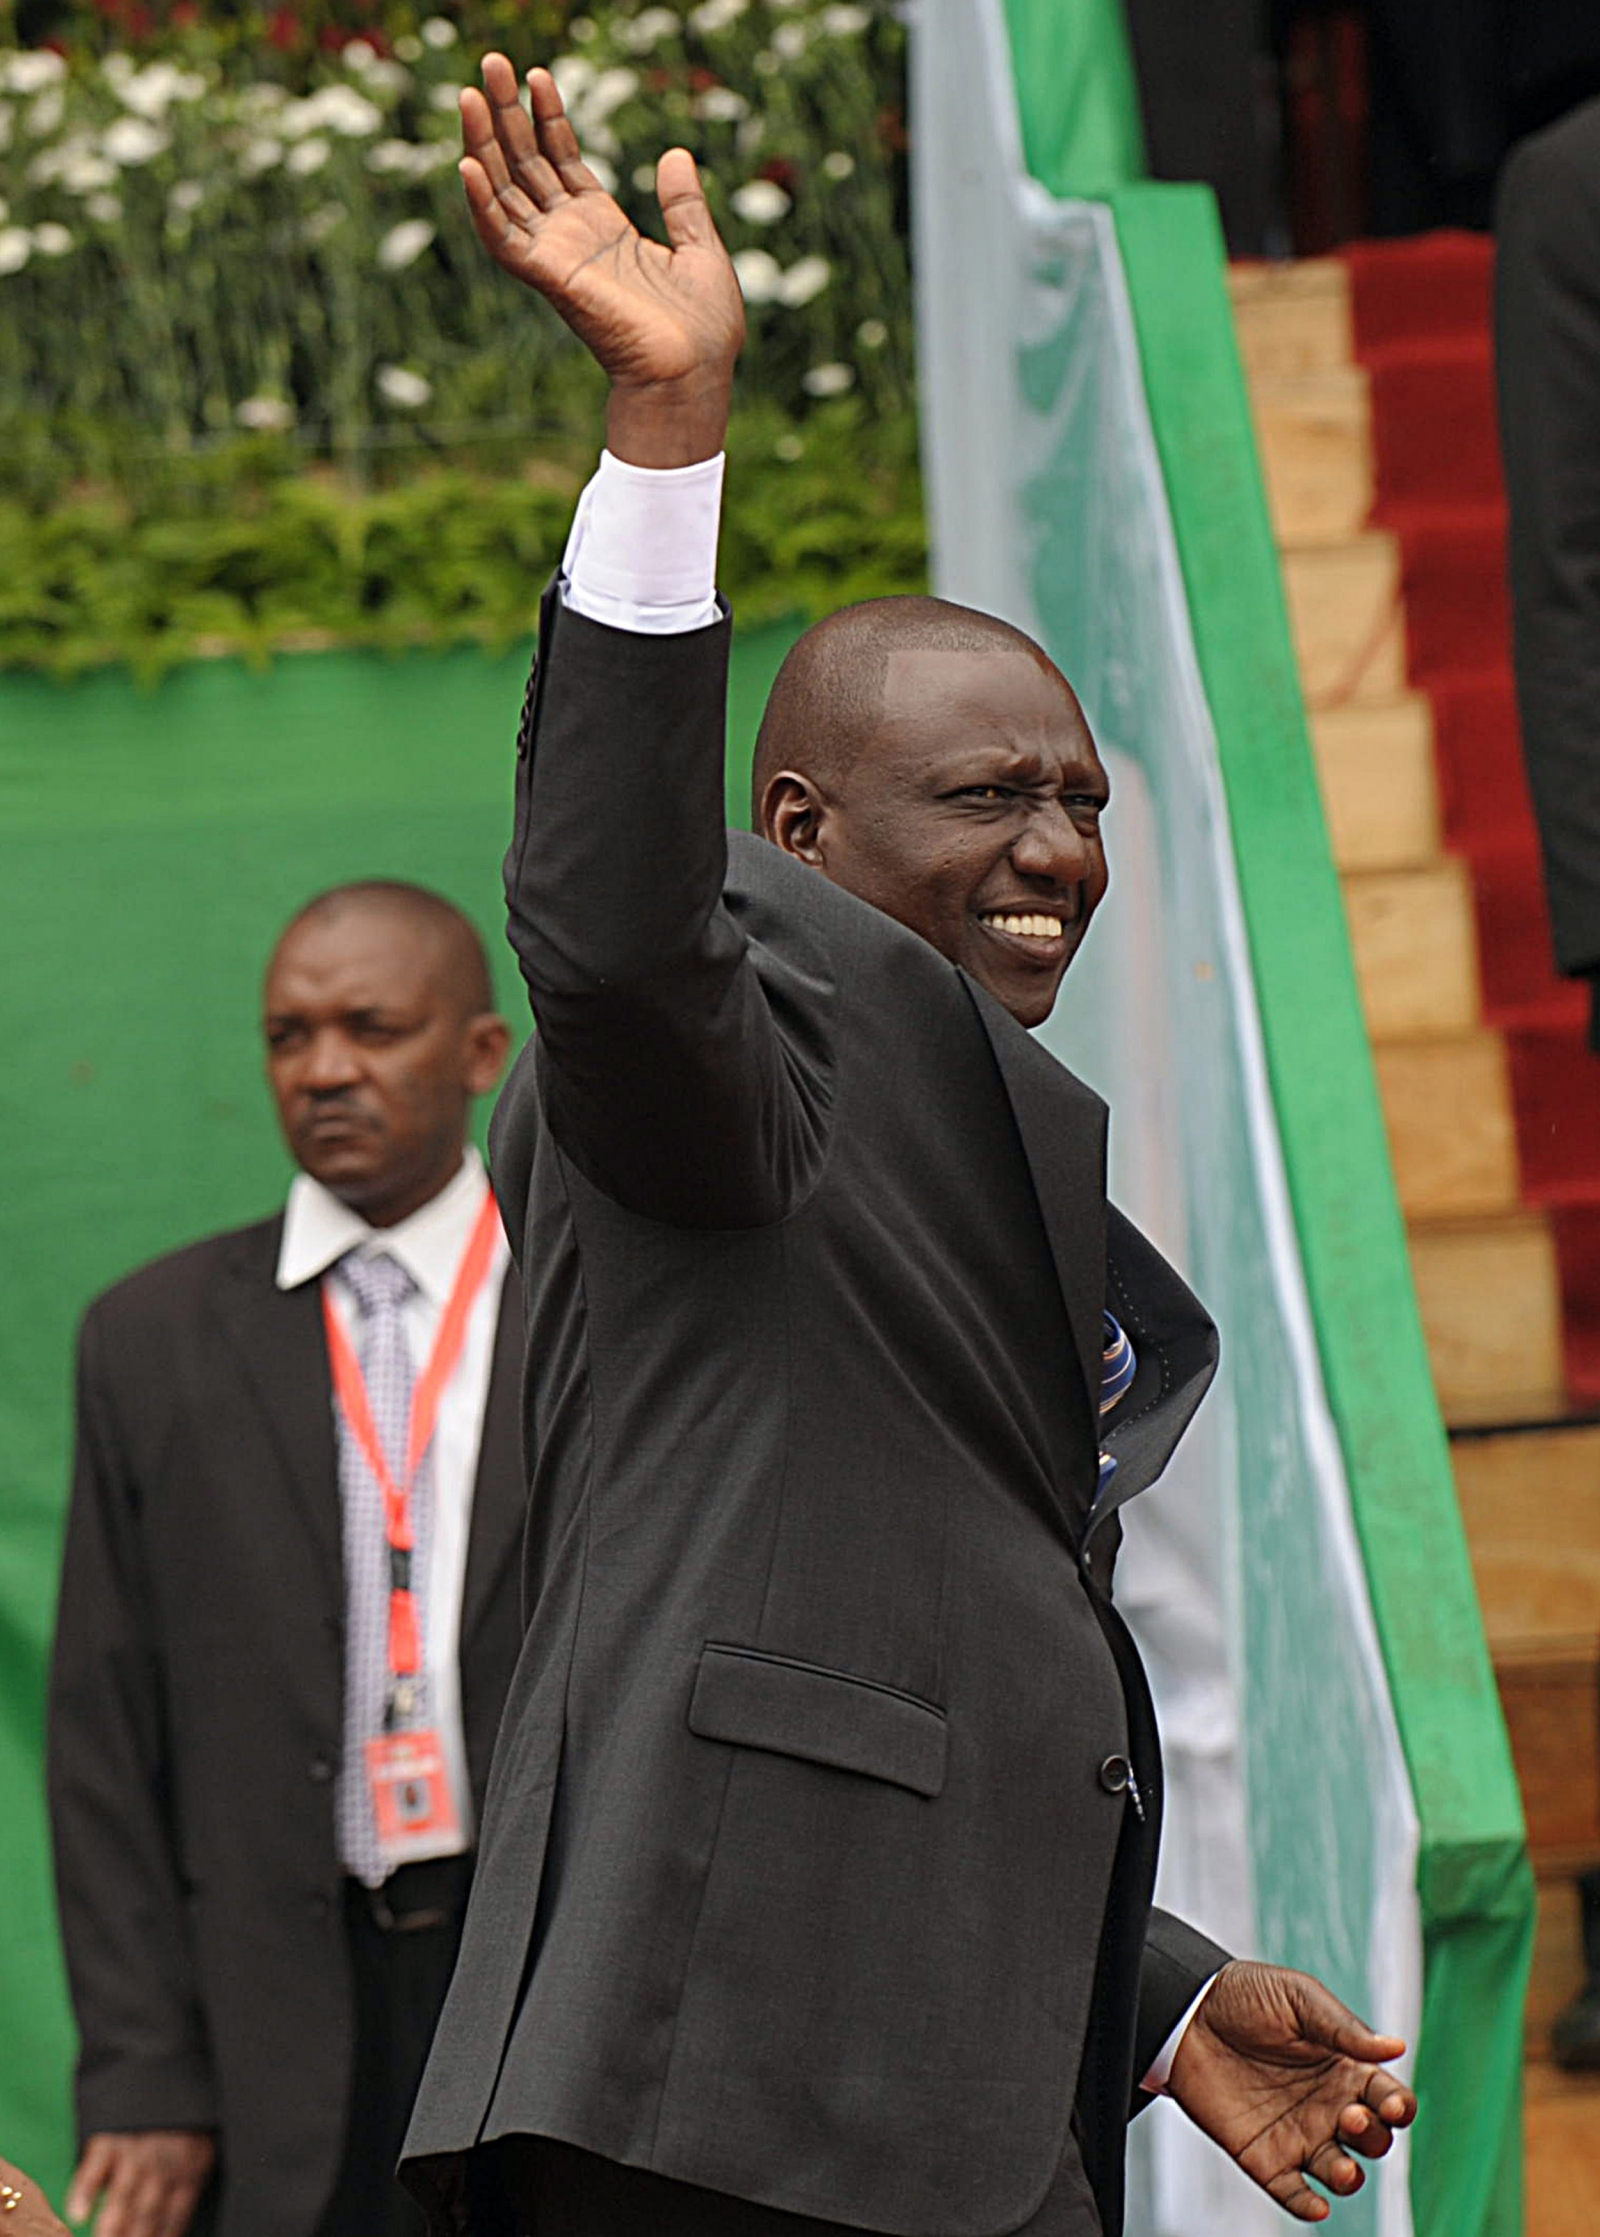 Deputy President William Ruto / Kenya's Deputy President William Ruto addresses a special ... - The study published on wednesday by intel research solutions shows that dp ruto enjoys 30 percent support ahead of odm leader raila odinga (17 percent).